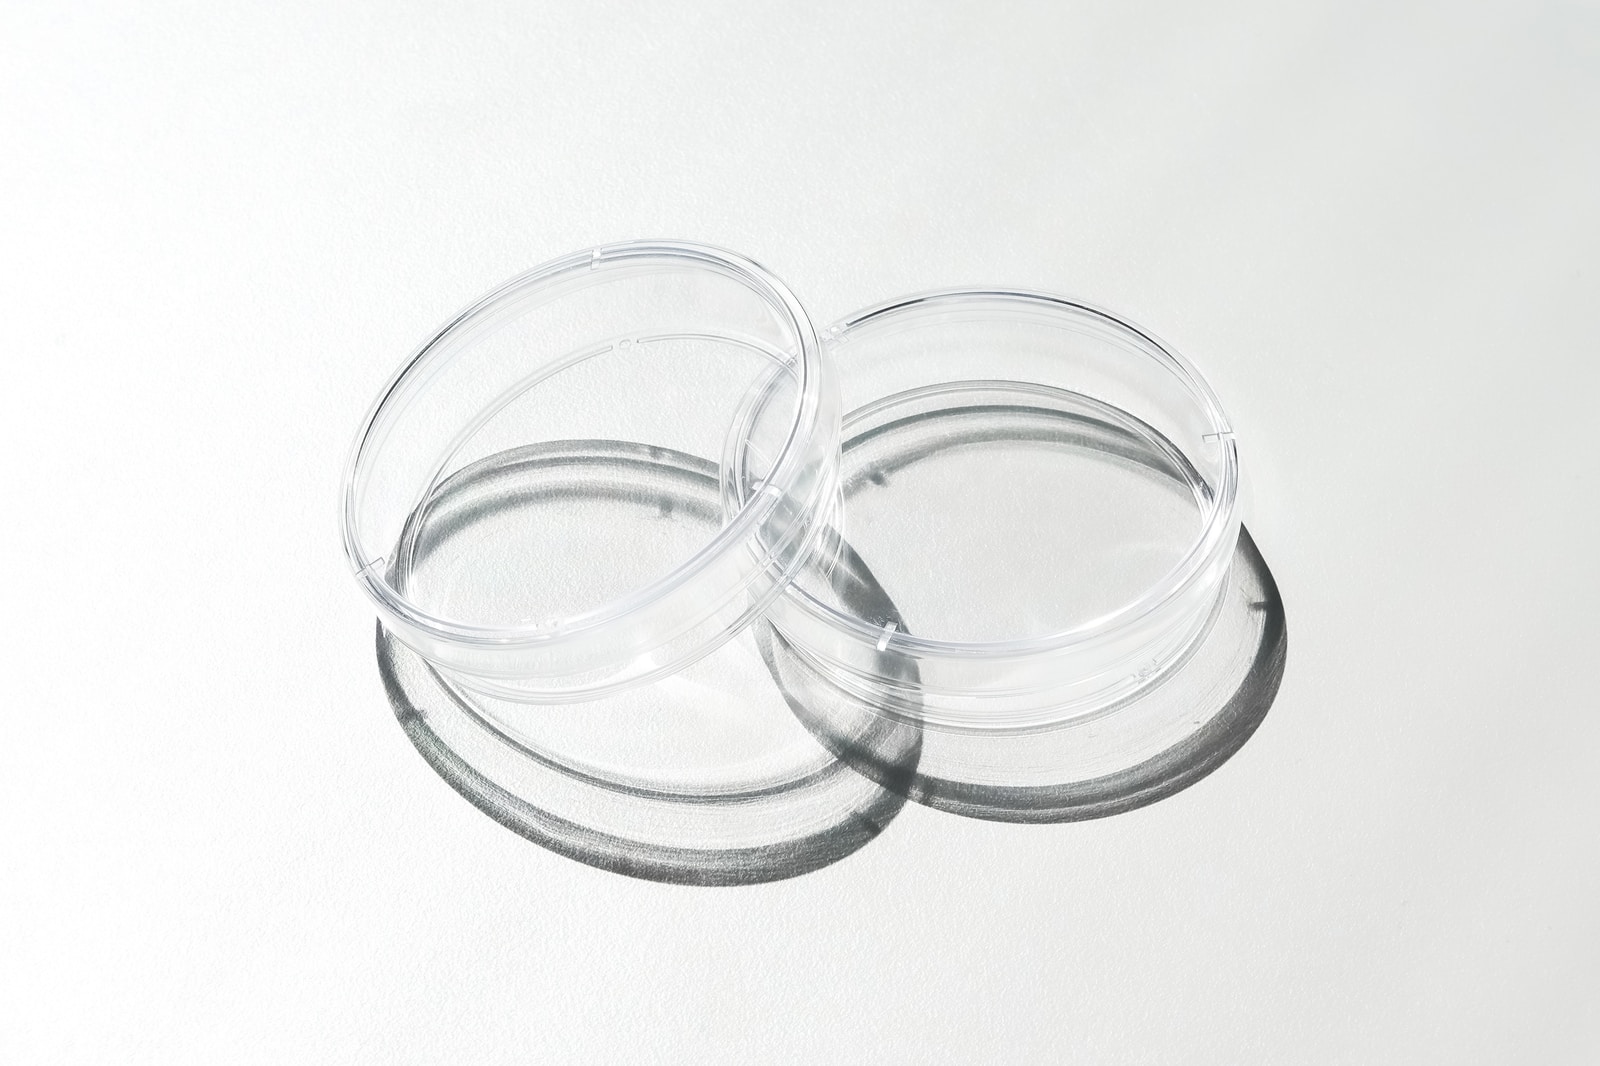 2 clear glass round bowls